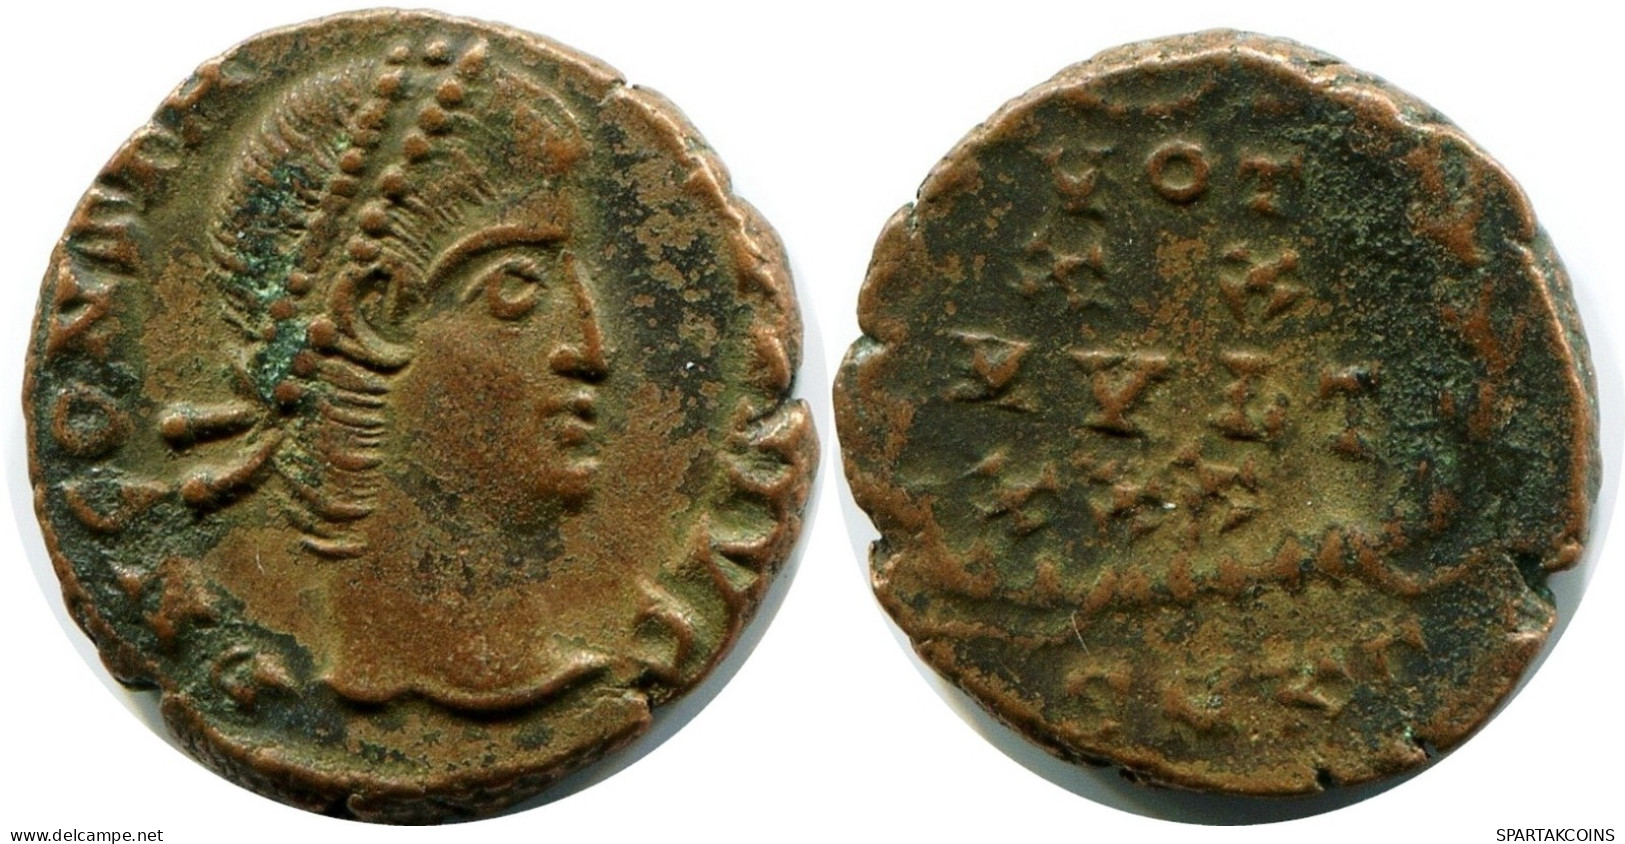 CONSTANS MINTED IN CYZICUS FOUND IN IHNASYAH HOARD EGYPT #ANC11590.14.U.A - The Christian Empire (307 AD Tot 363 AD)